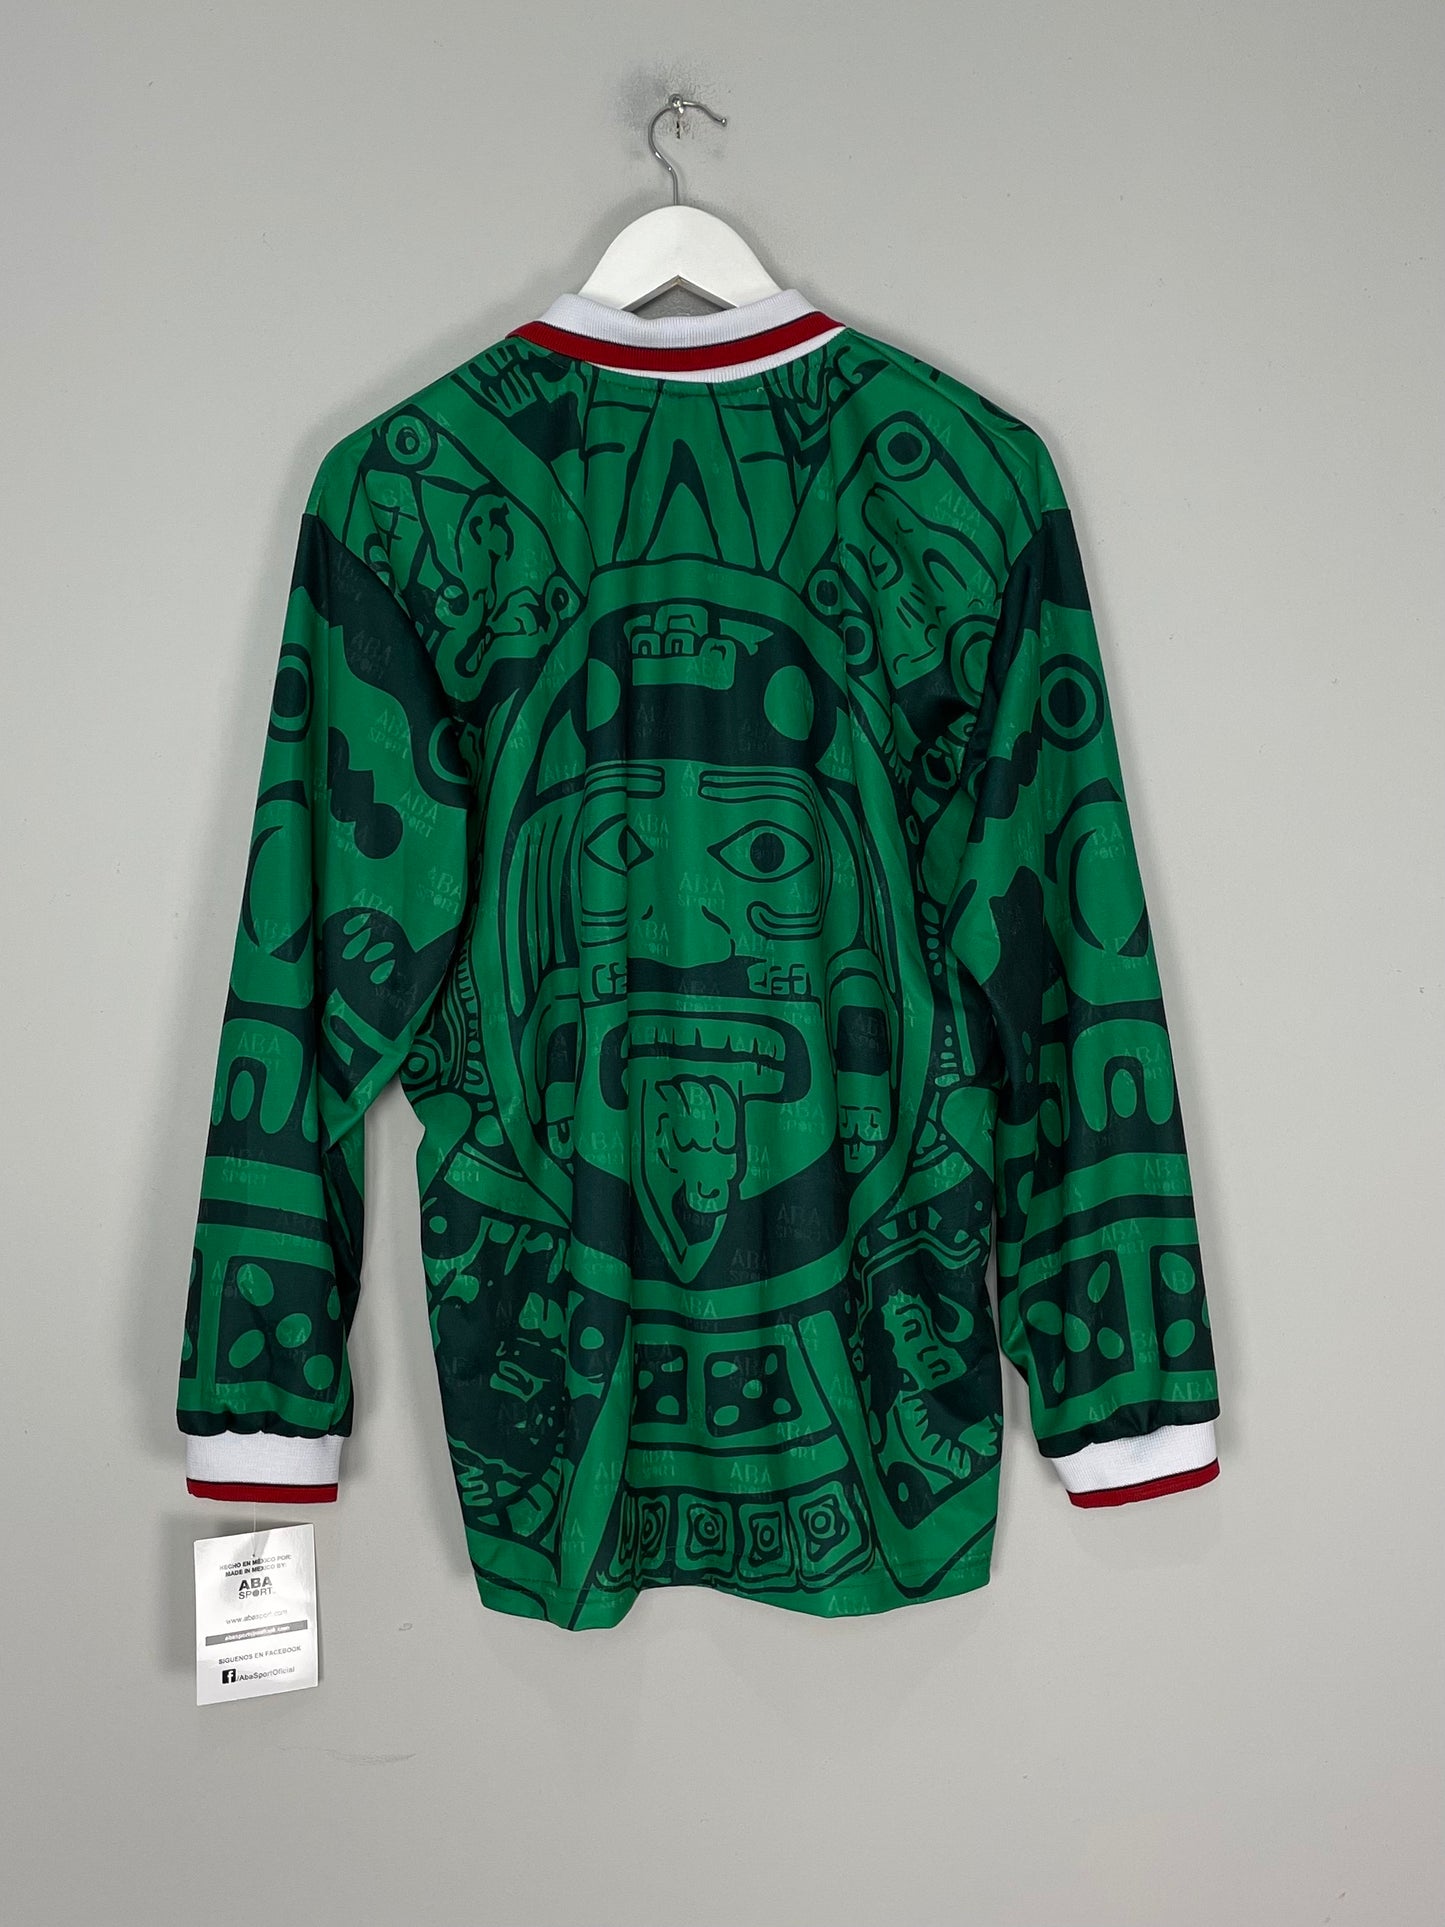 1998 MEXICO *REISSUE* L/S HOME SHIRT (MULTIPLE SIZES) ABA SPORT